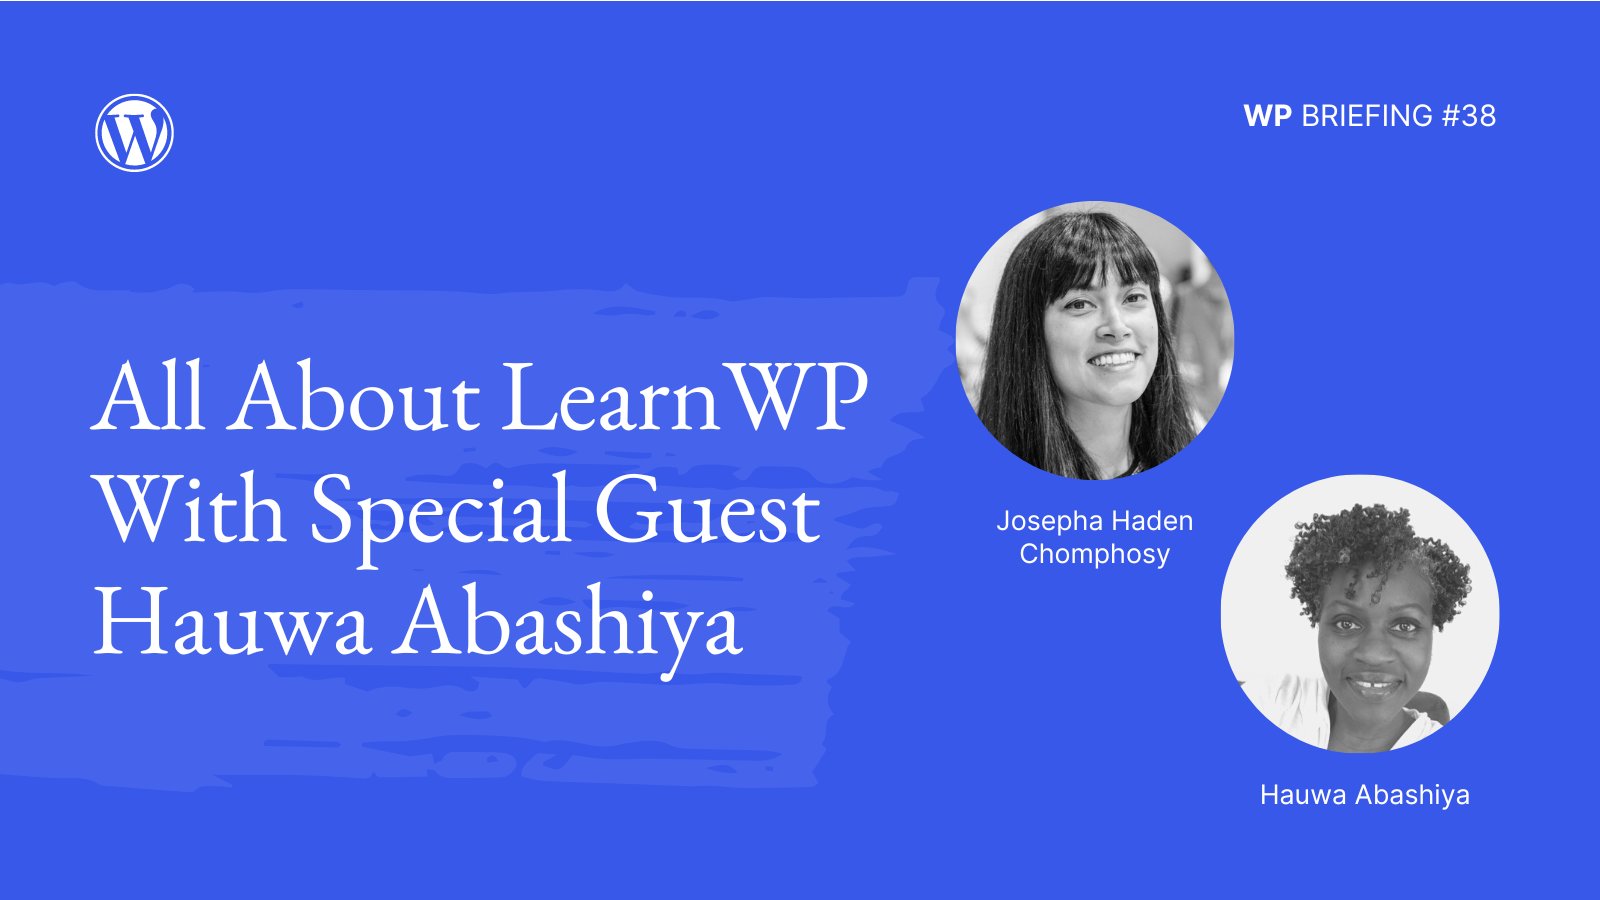 Blue background with images of Josepha Haden Chomphosy and Hauwa Abashiya and text: "All About LearnWP with Special Guest Hauwa Abashiya"